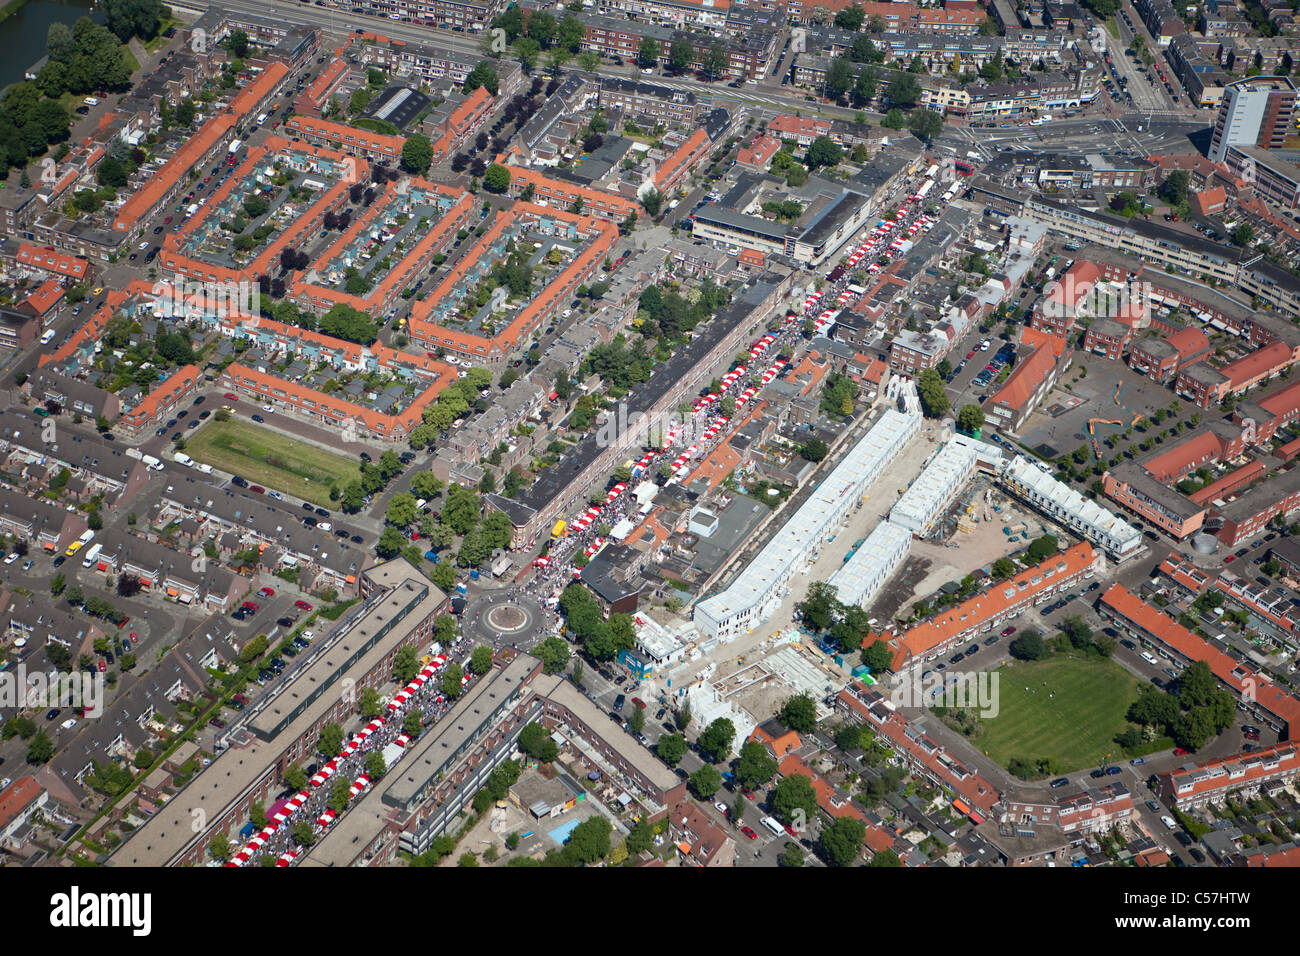 The Netherlands, Utrecht, Market in residential district. Aerial. Stock Photo